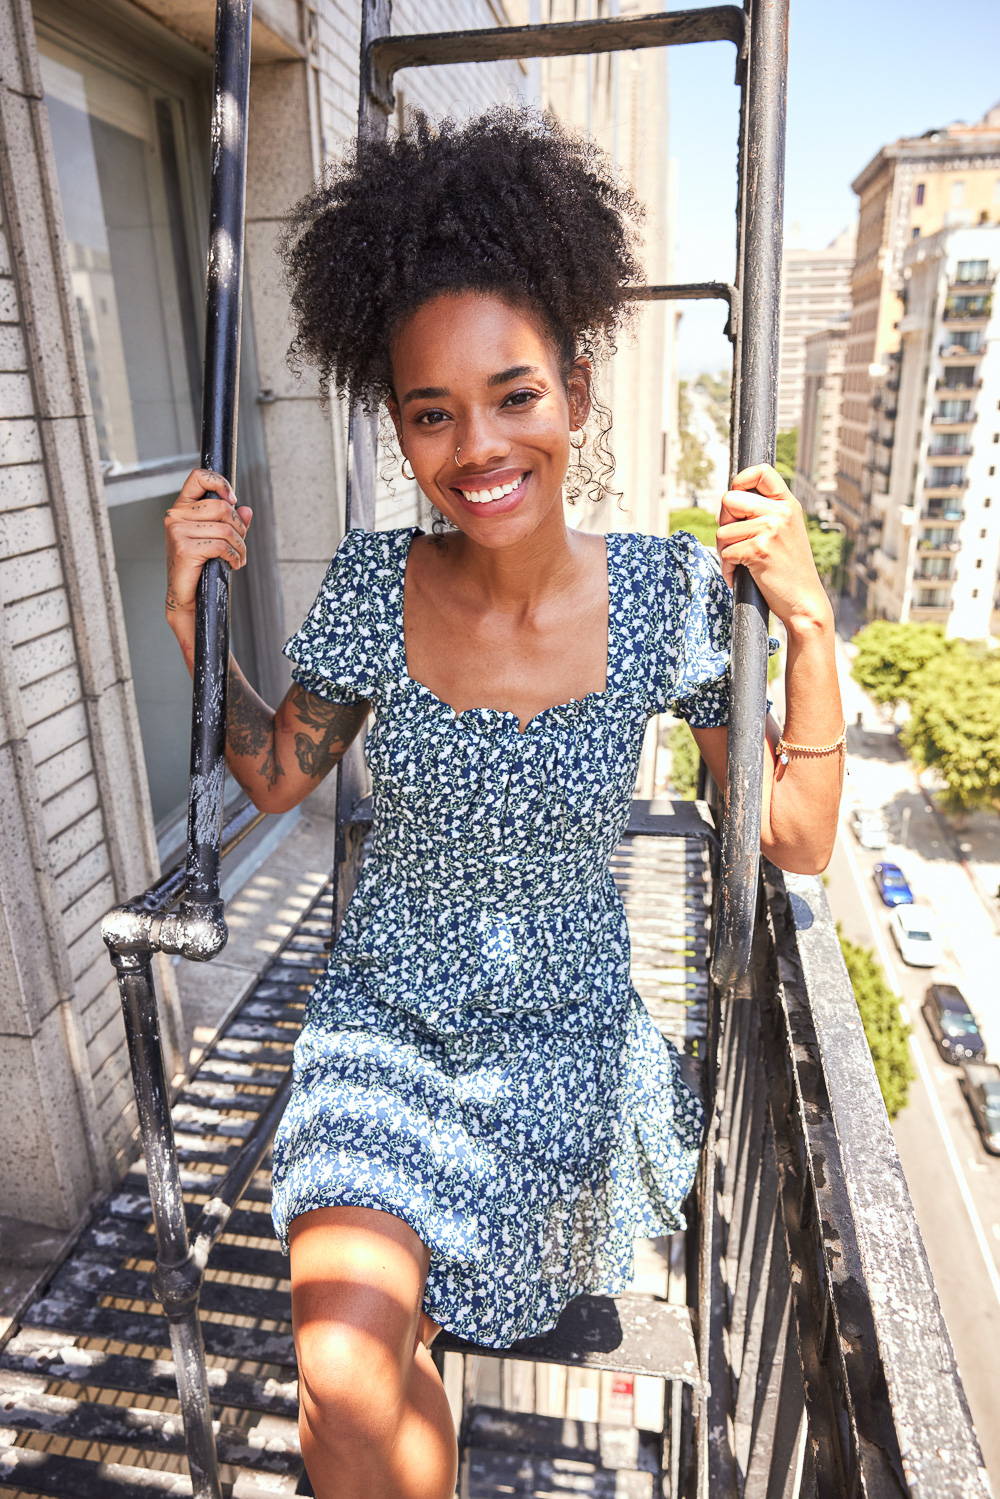 Trixxi Back to school embracing dorm life hanging out on the balcony in a navy with white flowers tier dress.